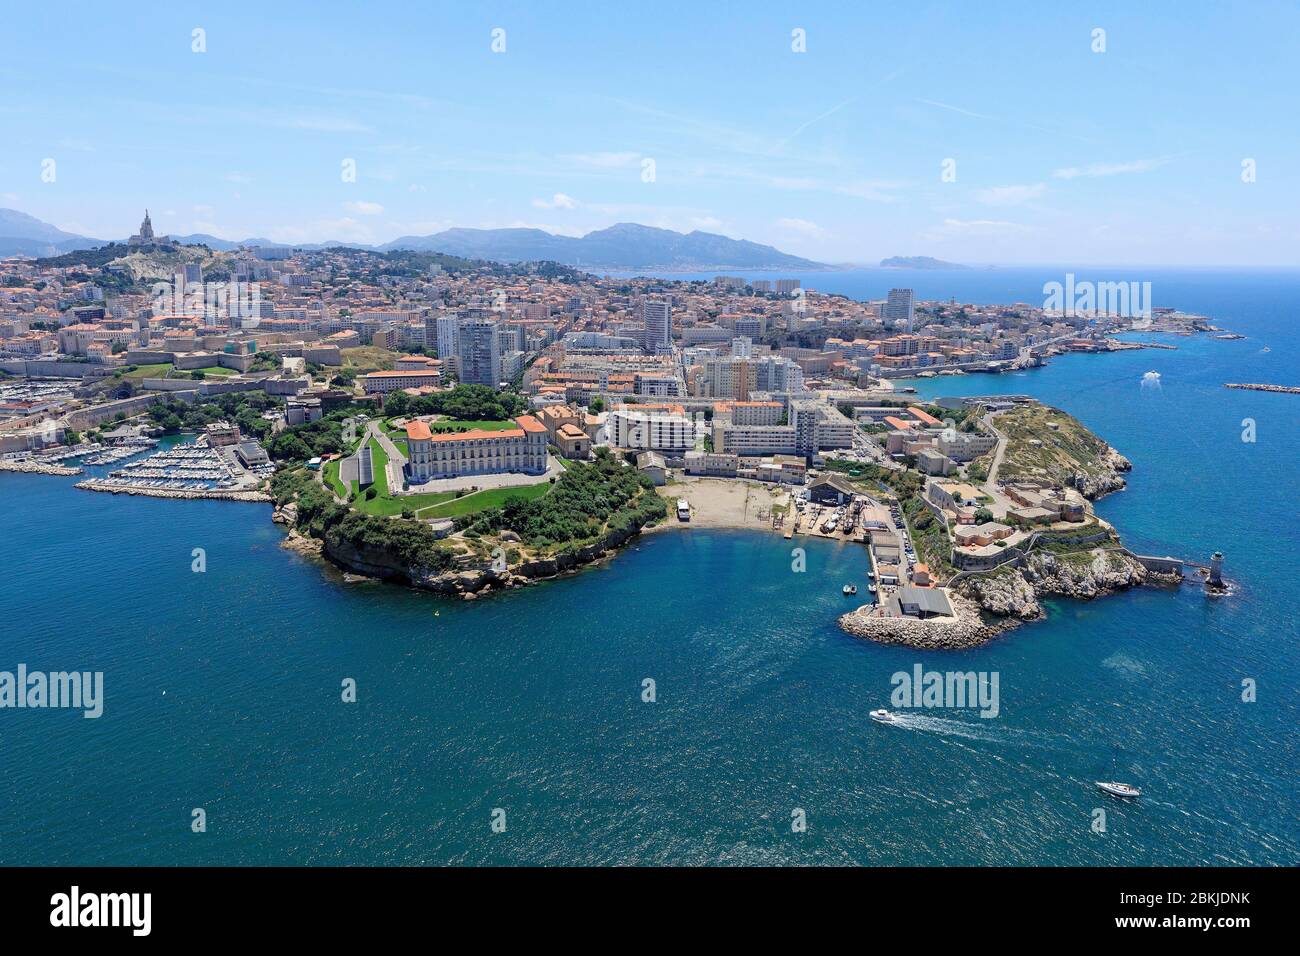 France, Bouches du Rhone, Marseille, 7th arrondissement, Pharo district, Pharo palace and Pharo cove, Pointe du Pharo, Notre Dame de la Garde basilica in the background (aerial view) Stock Photo